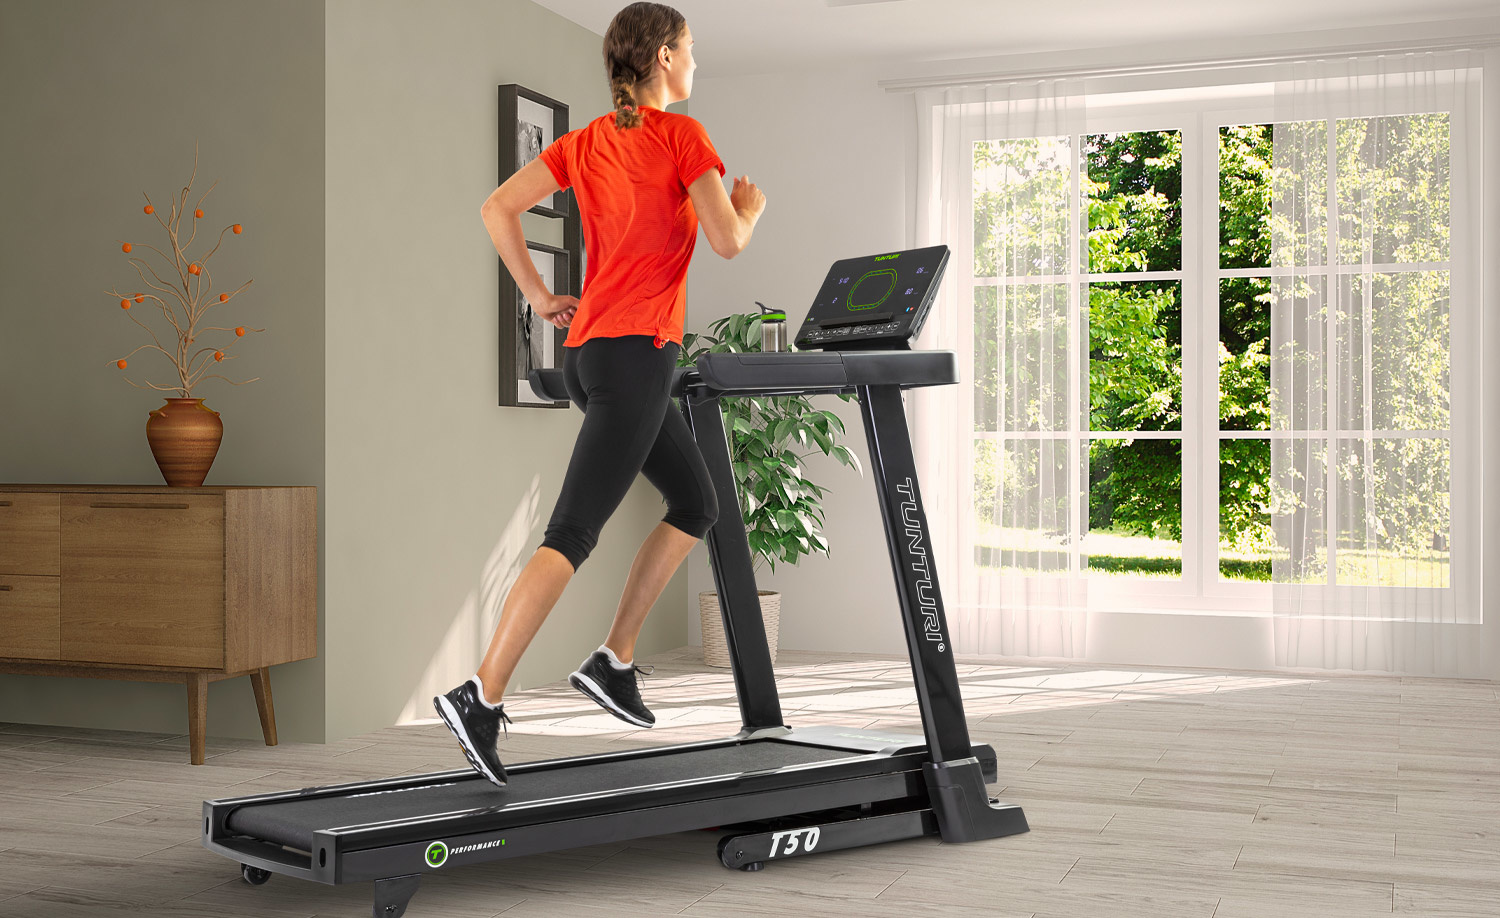 What should you pay attention to when buying a treadmill?